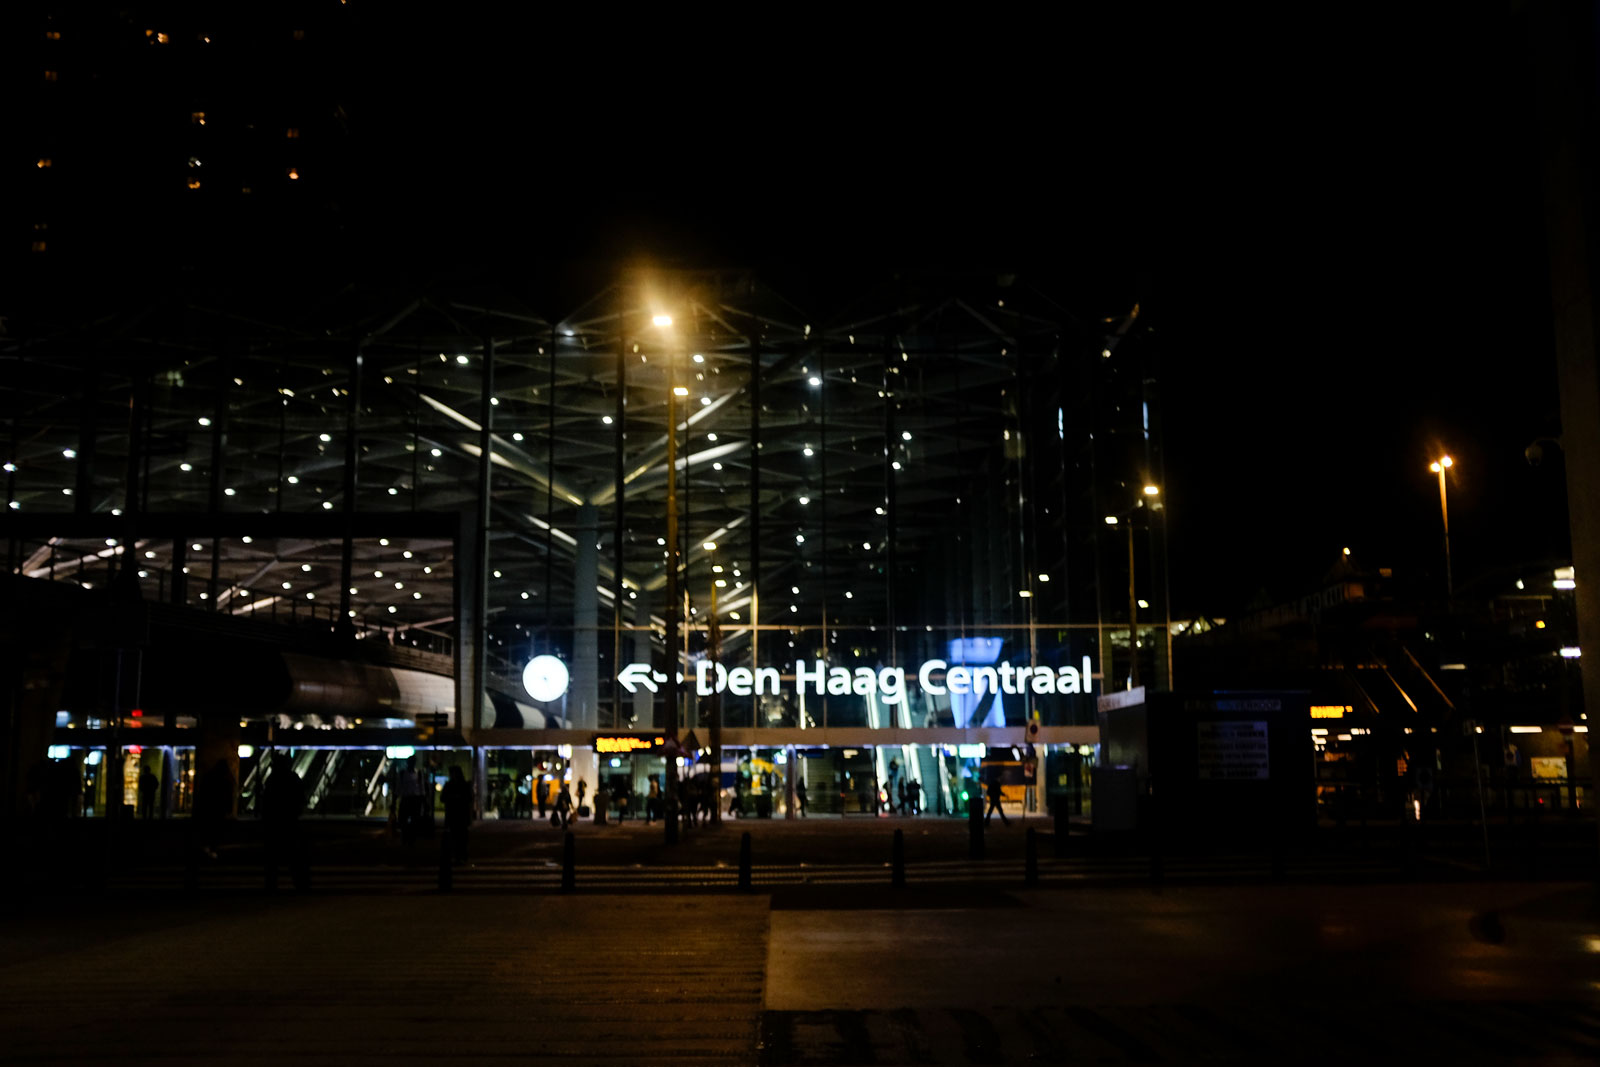 Den Haag Train Station is seen at night